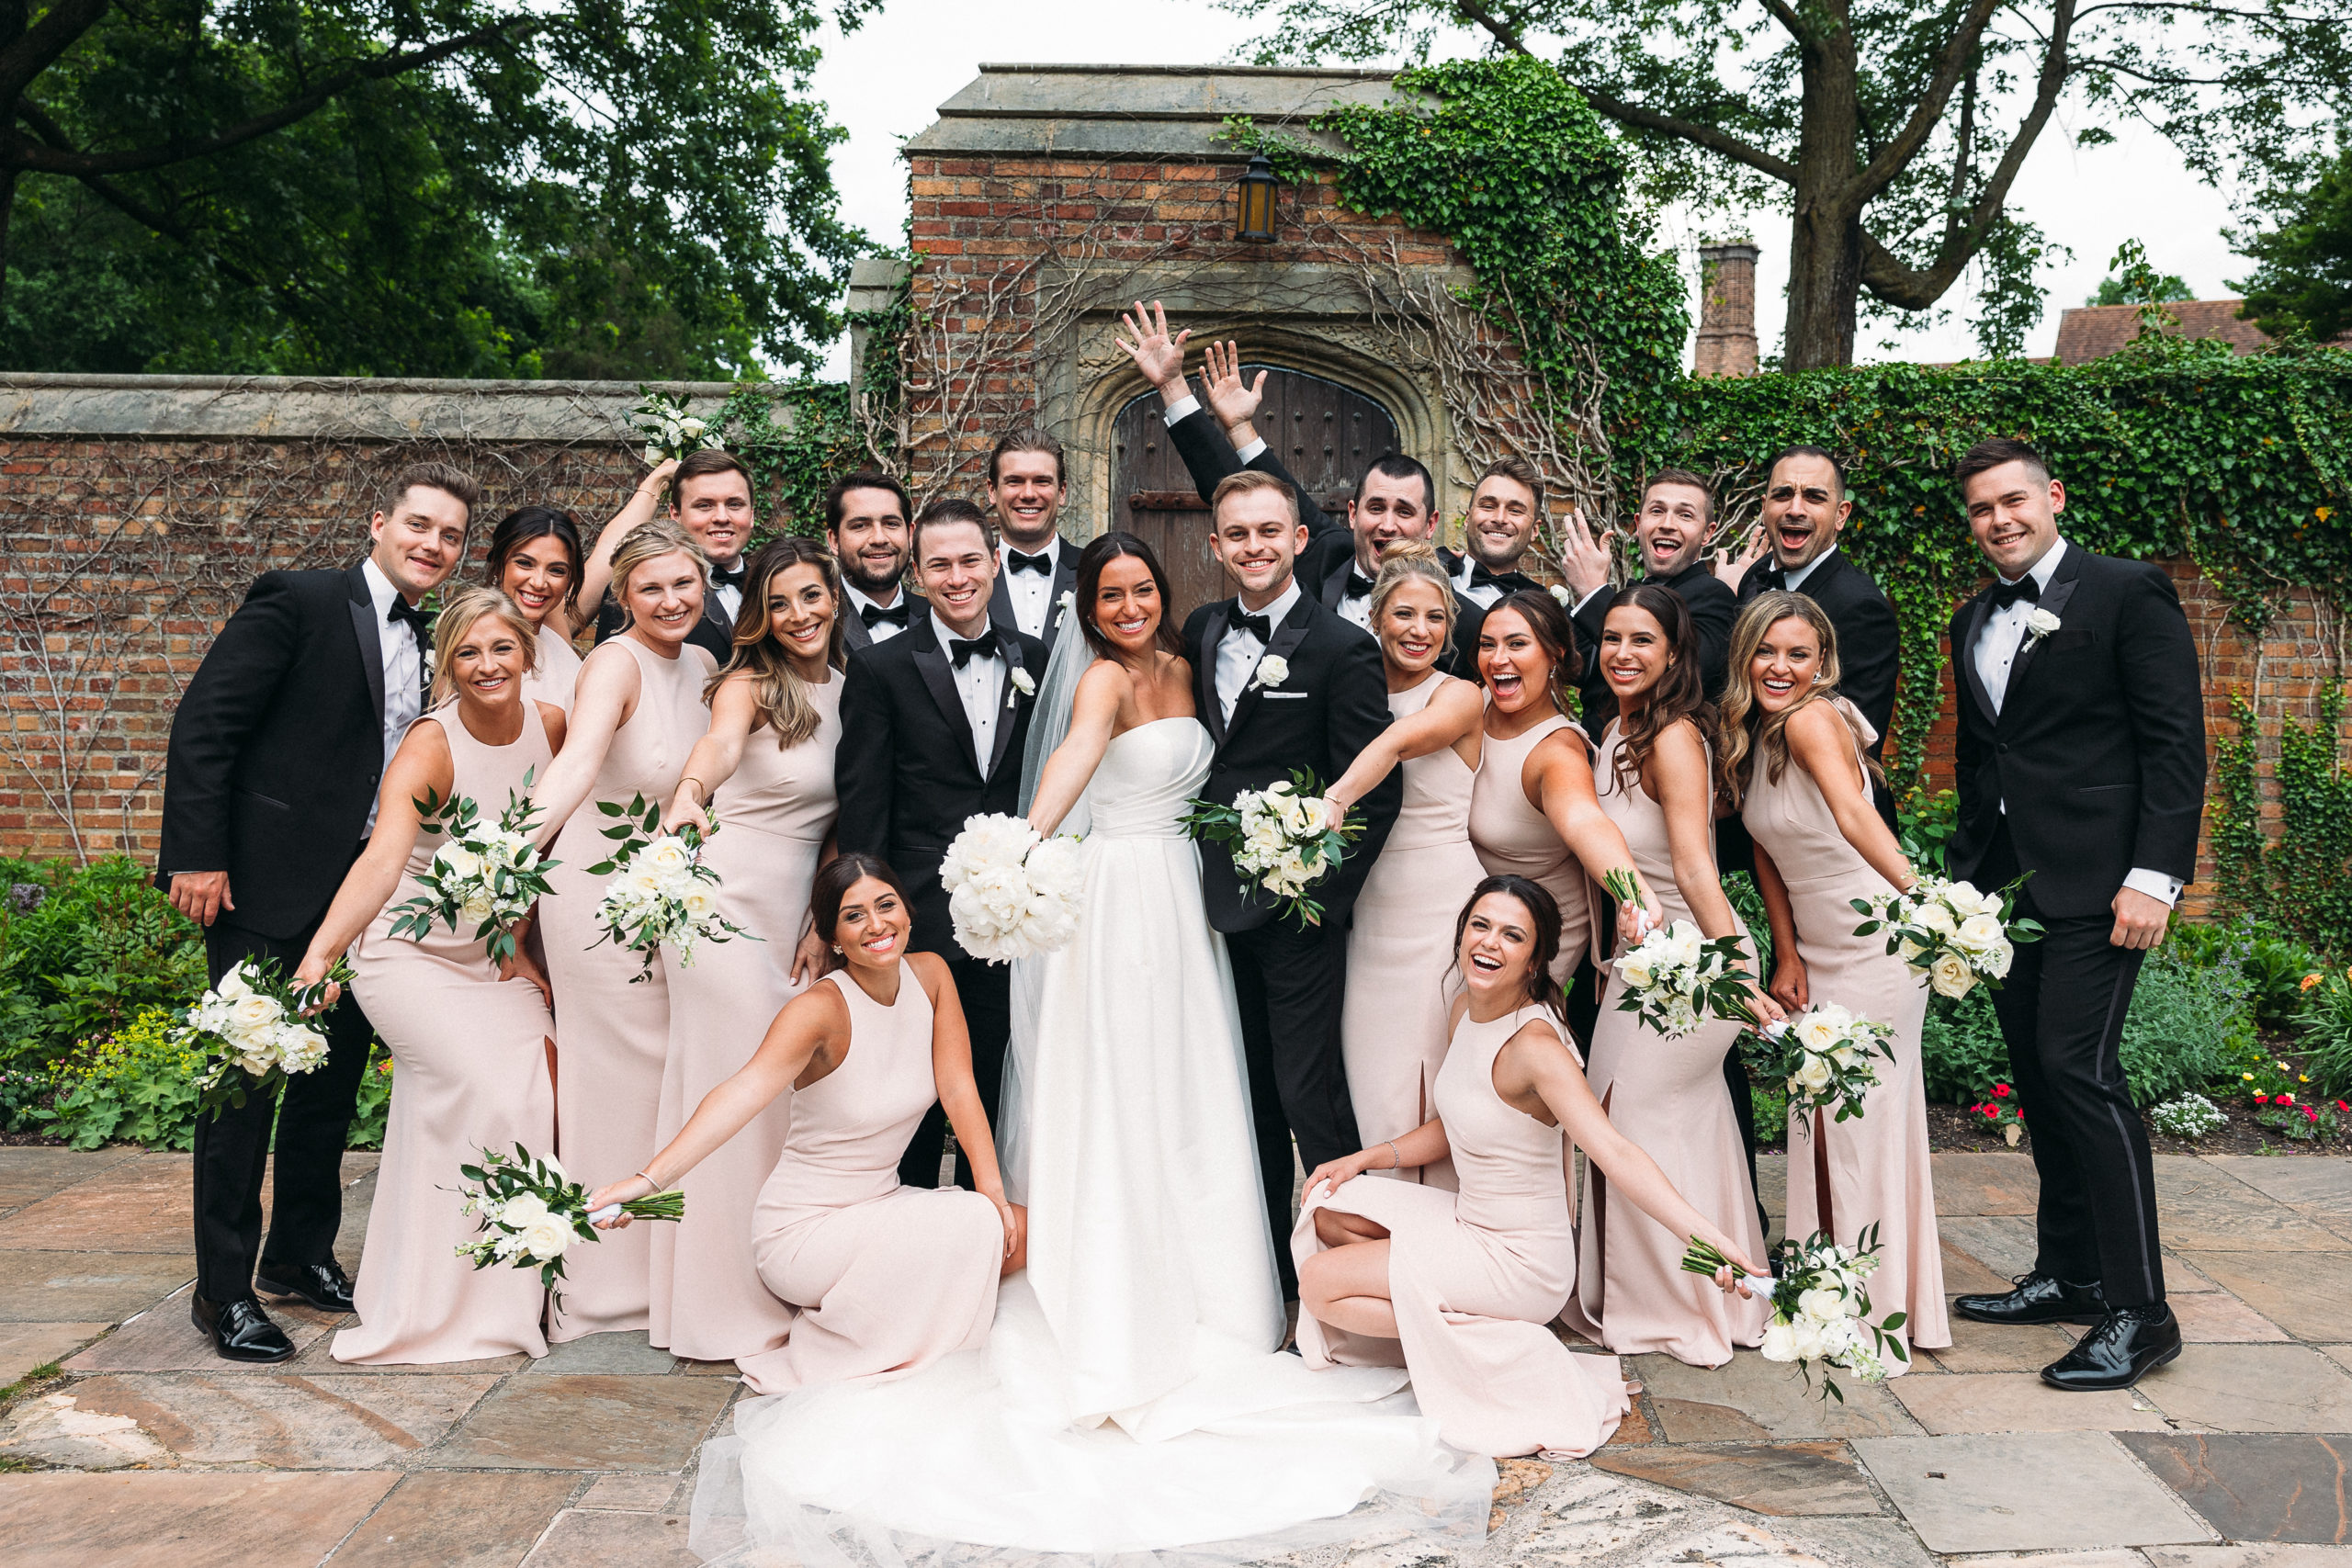 Wedding Blog: The Biggest Trends for a Big Wedding Year - Meadow Brook Hall